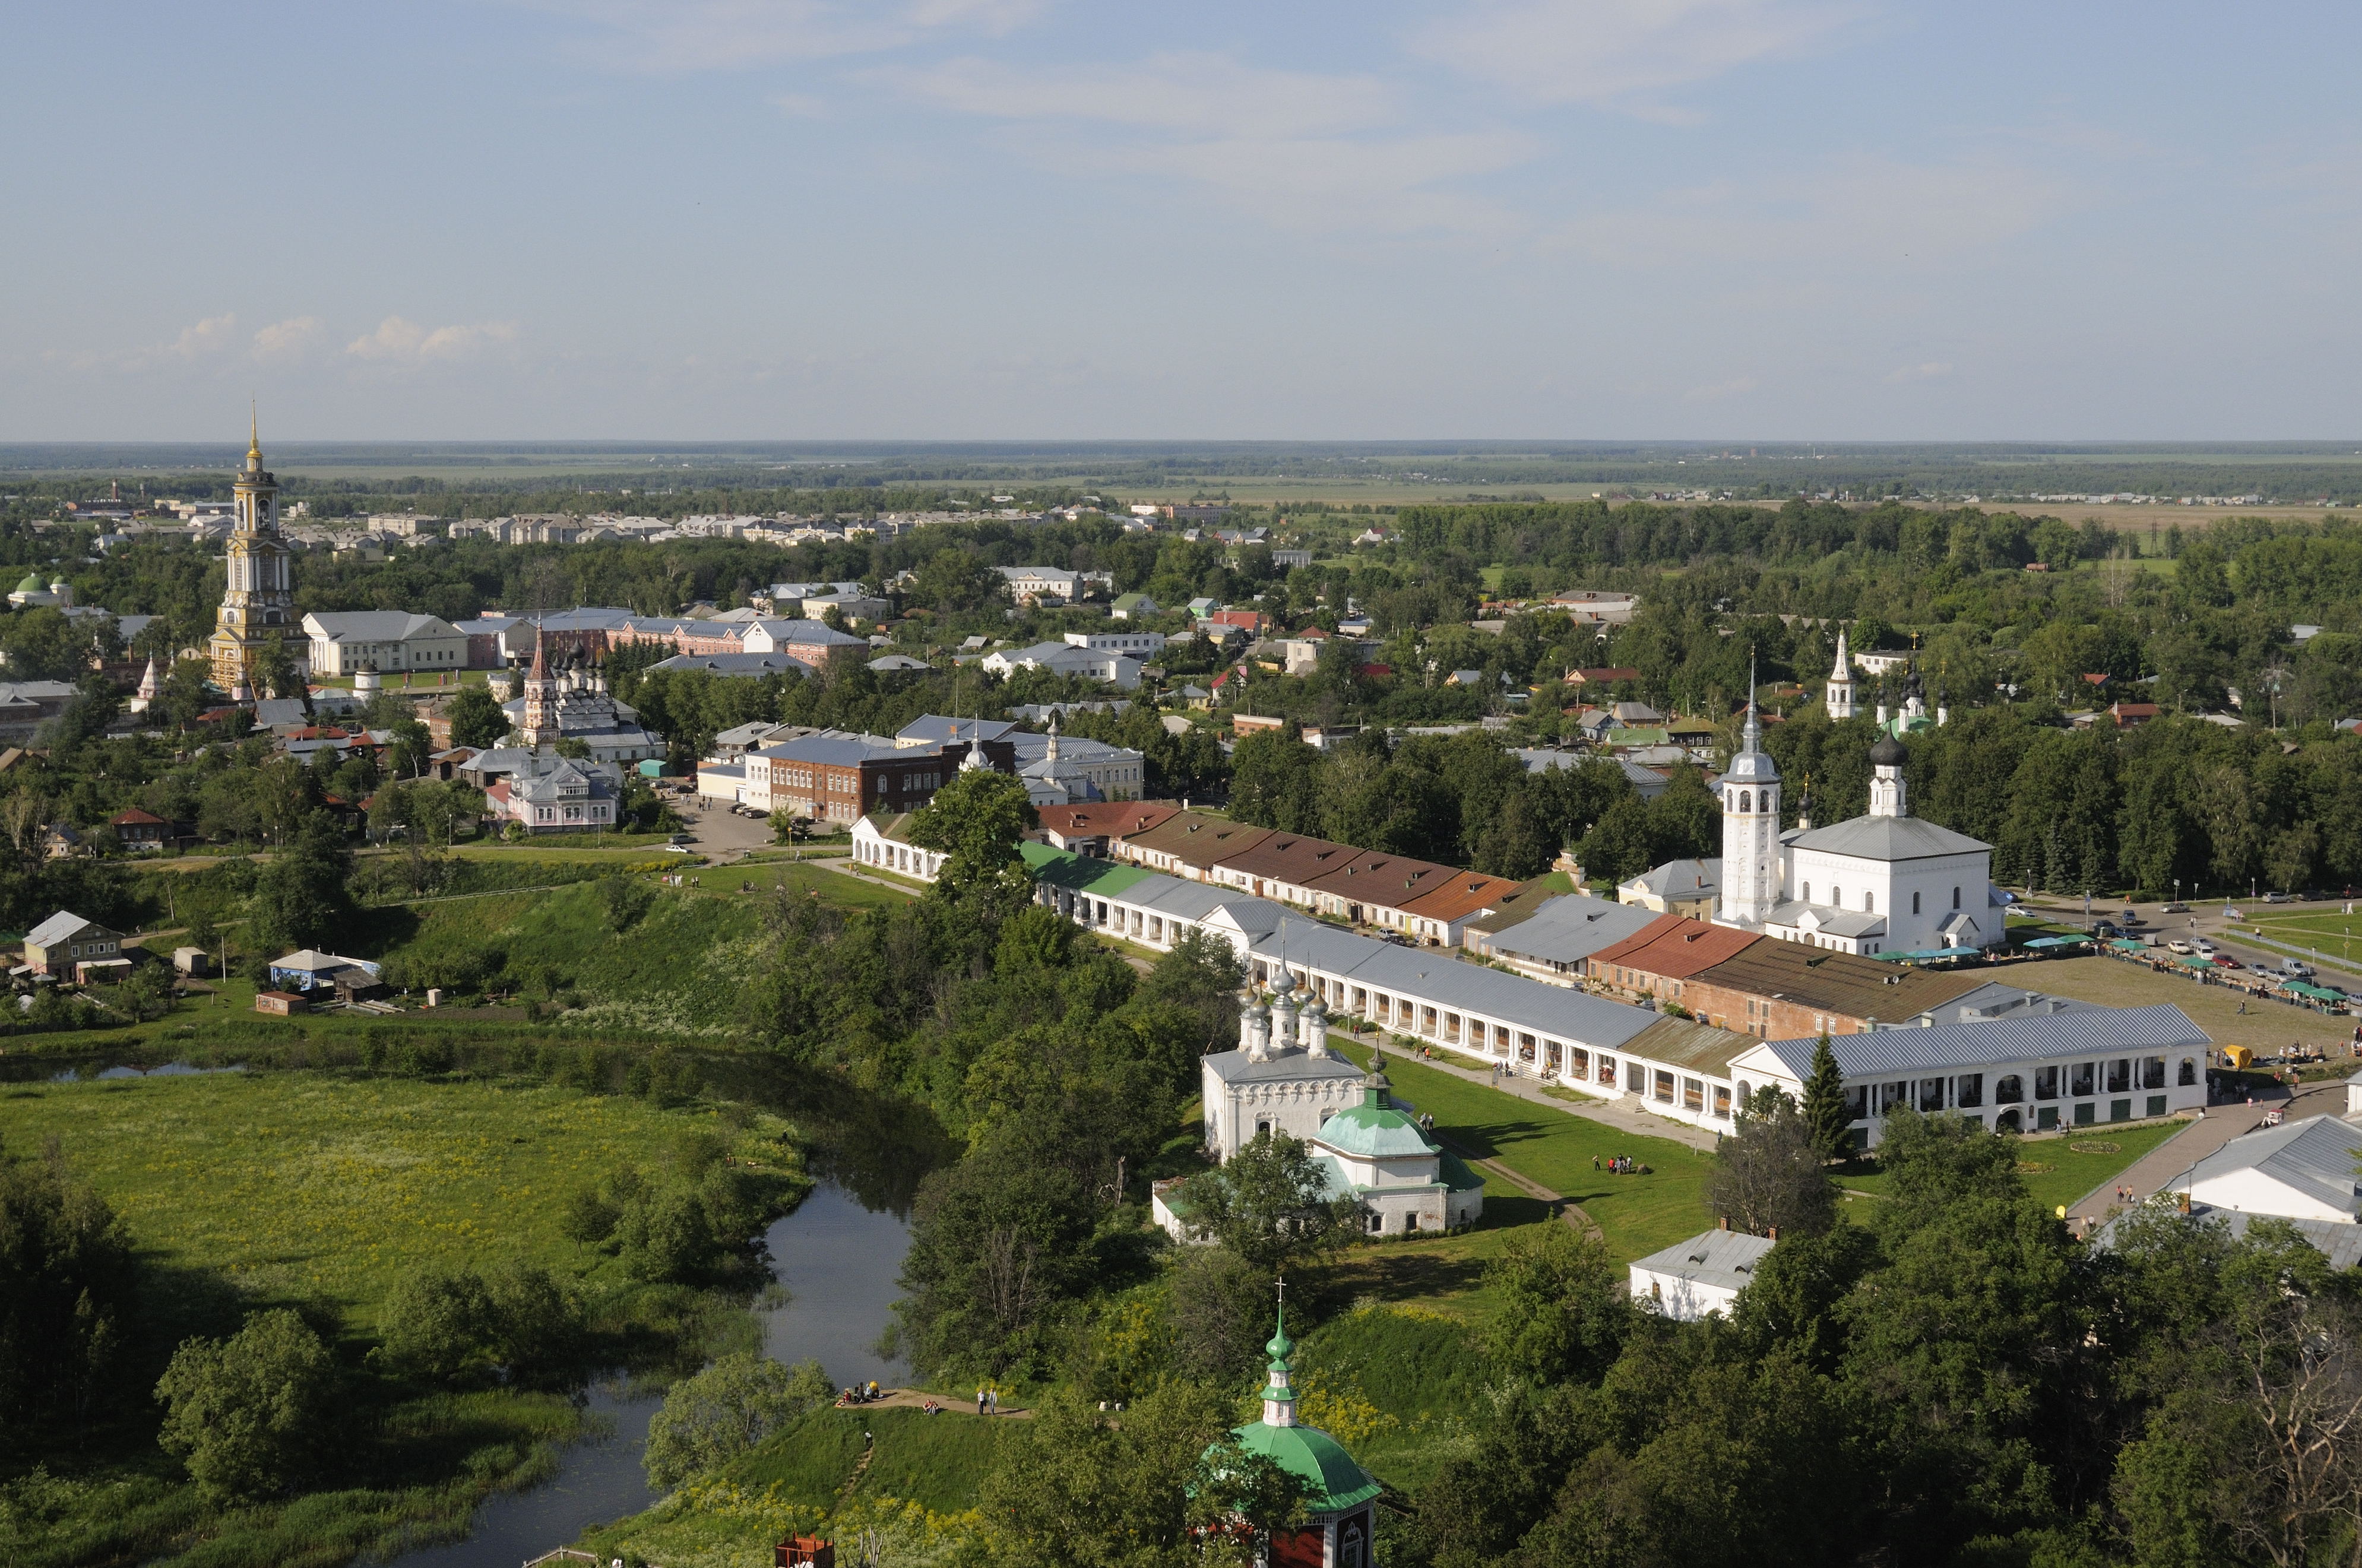 Суздаль (Suzdal), Russia - Monterrasol private tours to Суздаль (Suzdal), Russia. Travel agency offers custom private car tours to see Суздаль (Suzdal) in Russia. Order custom private tour to Суздаль (Suzdal) with departure date on request.